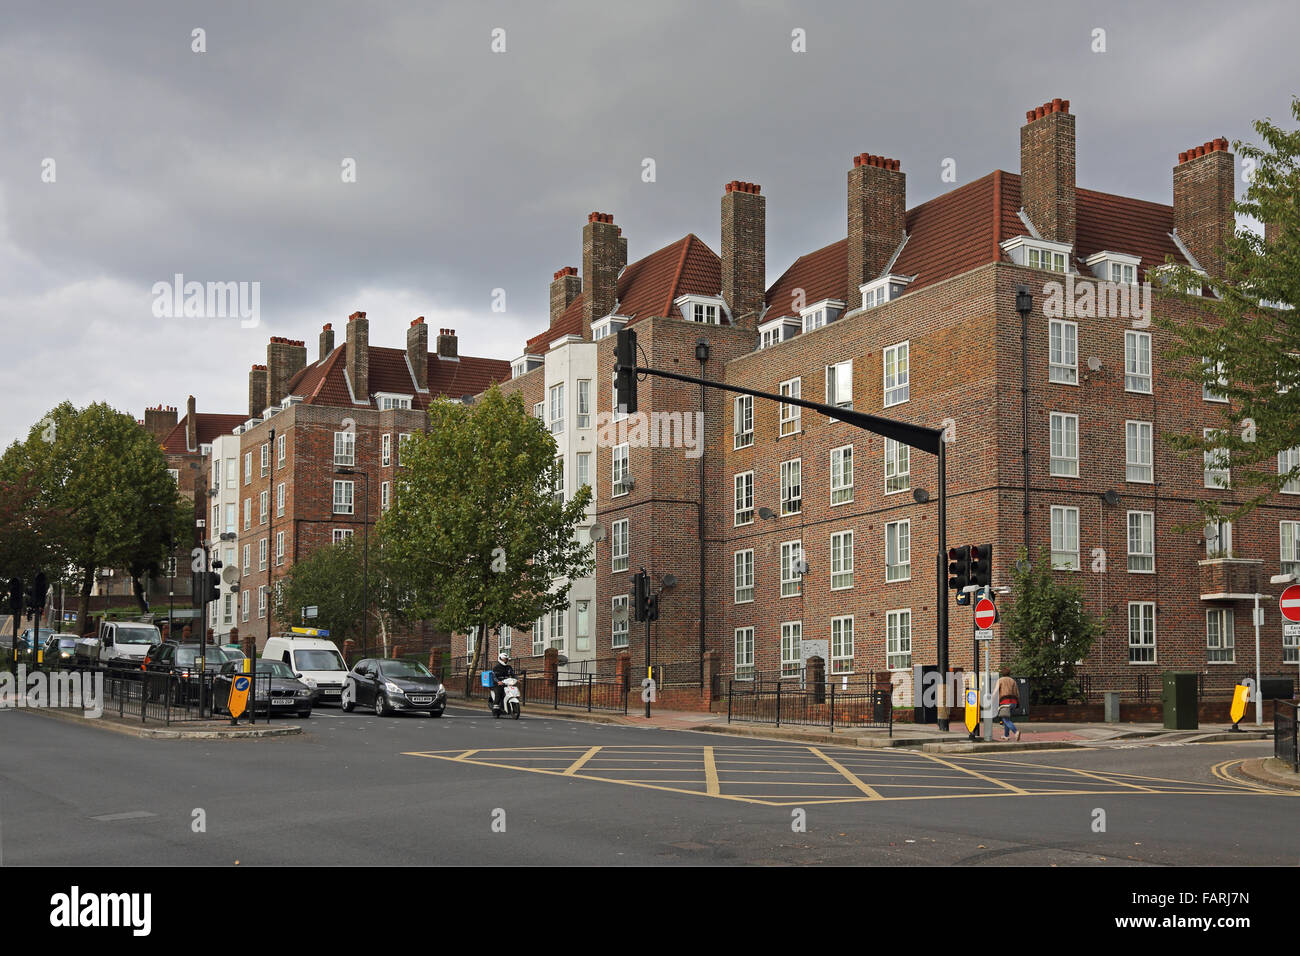 Local Authority 1930s tenement blocks on Dog Kennel Hill in South London. Large, traffic light controlled junction in foreground Stock Photo